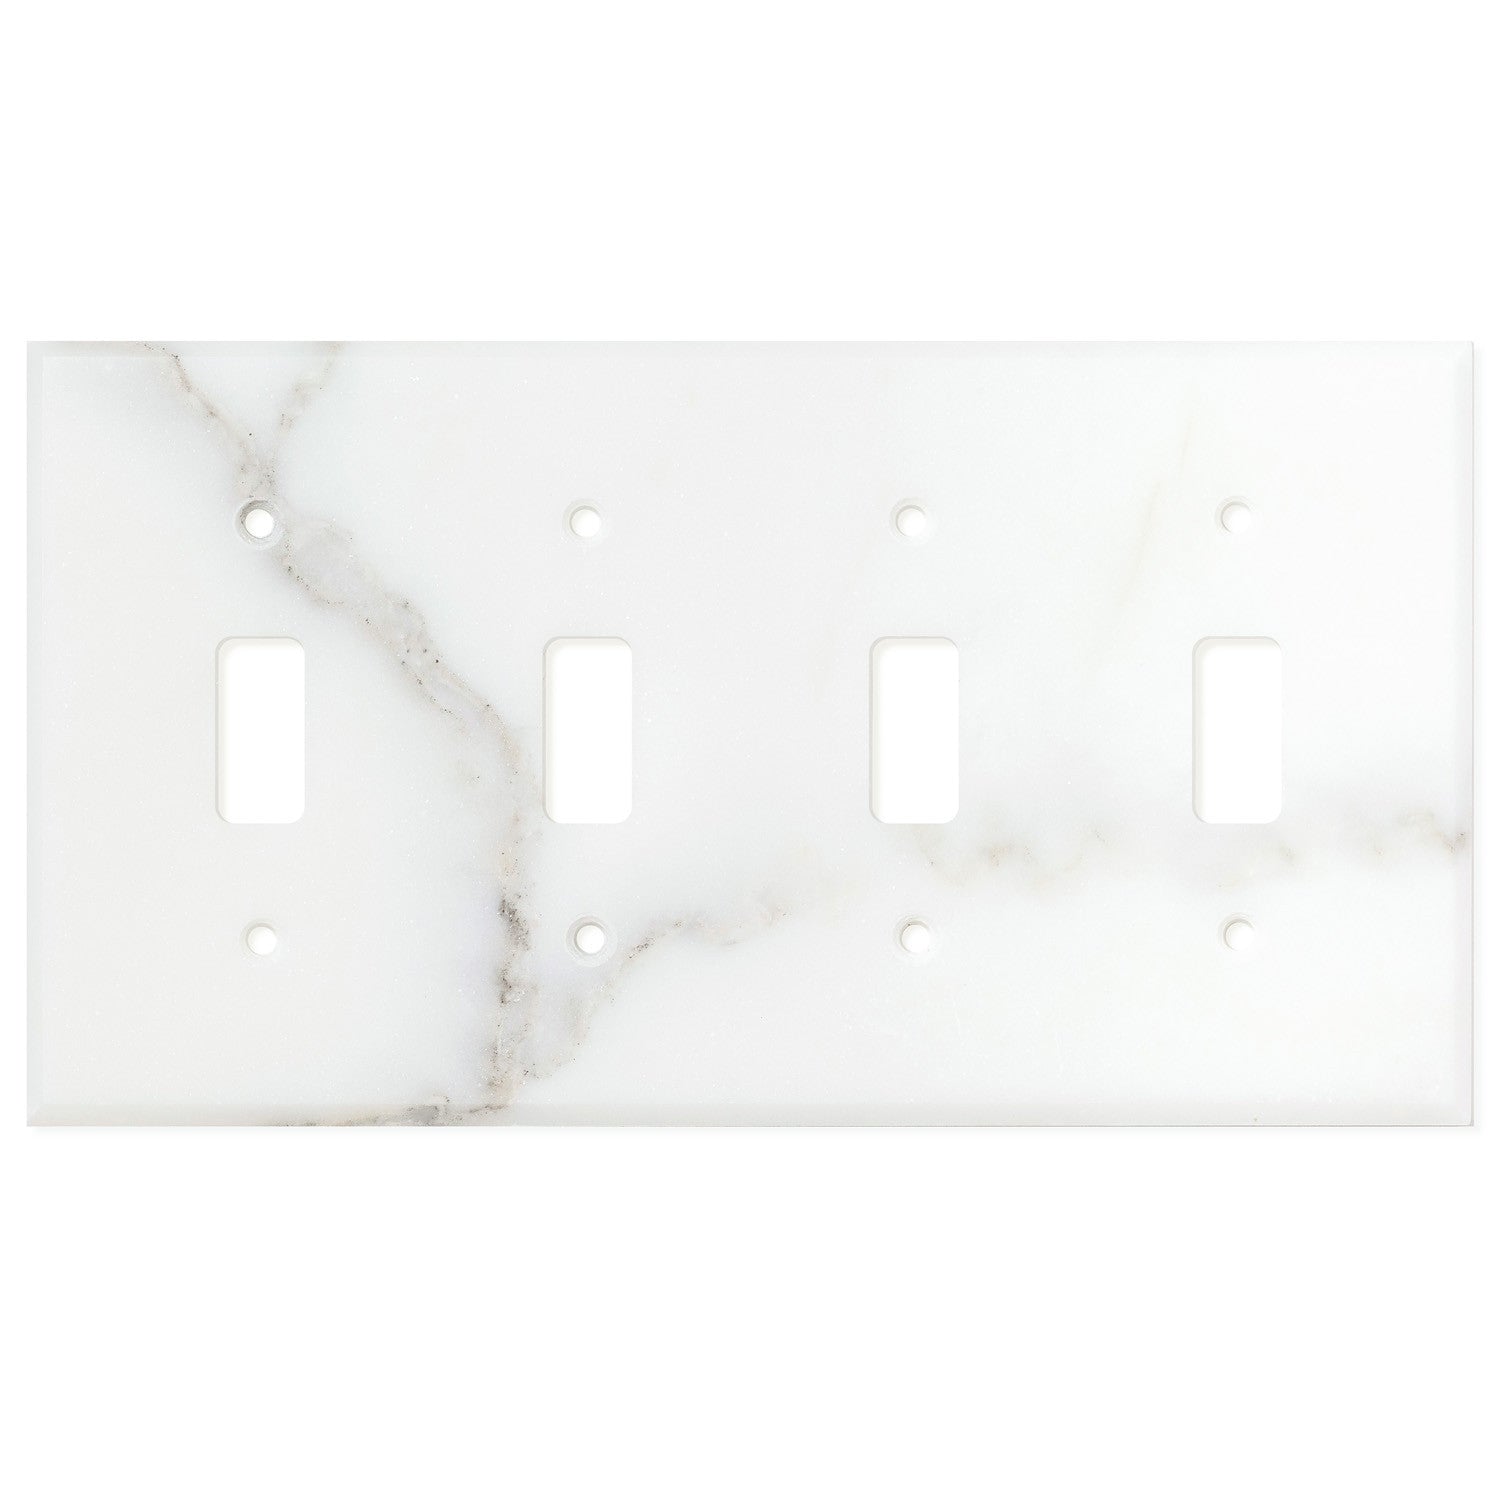 Calacatta Gold Marble Switch Plate Cover, Polished (4 TOGGLE) - Tilephile